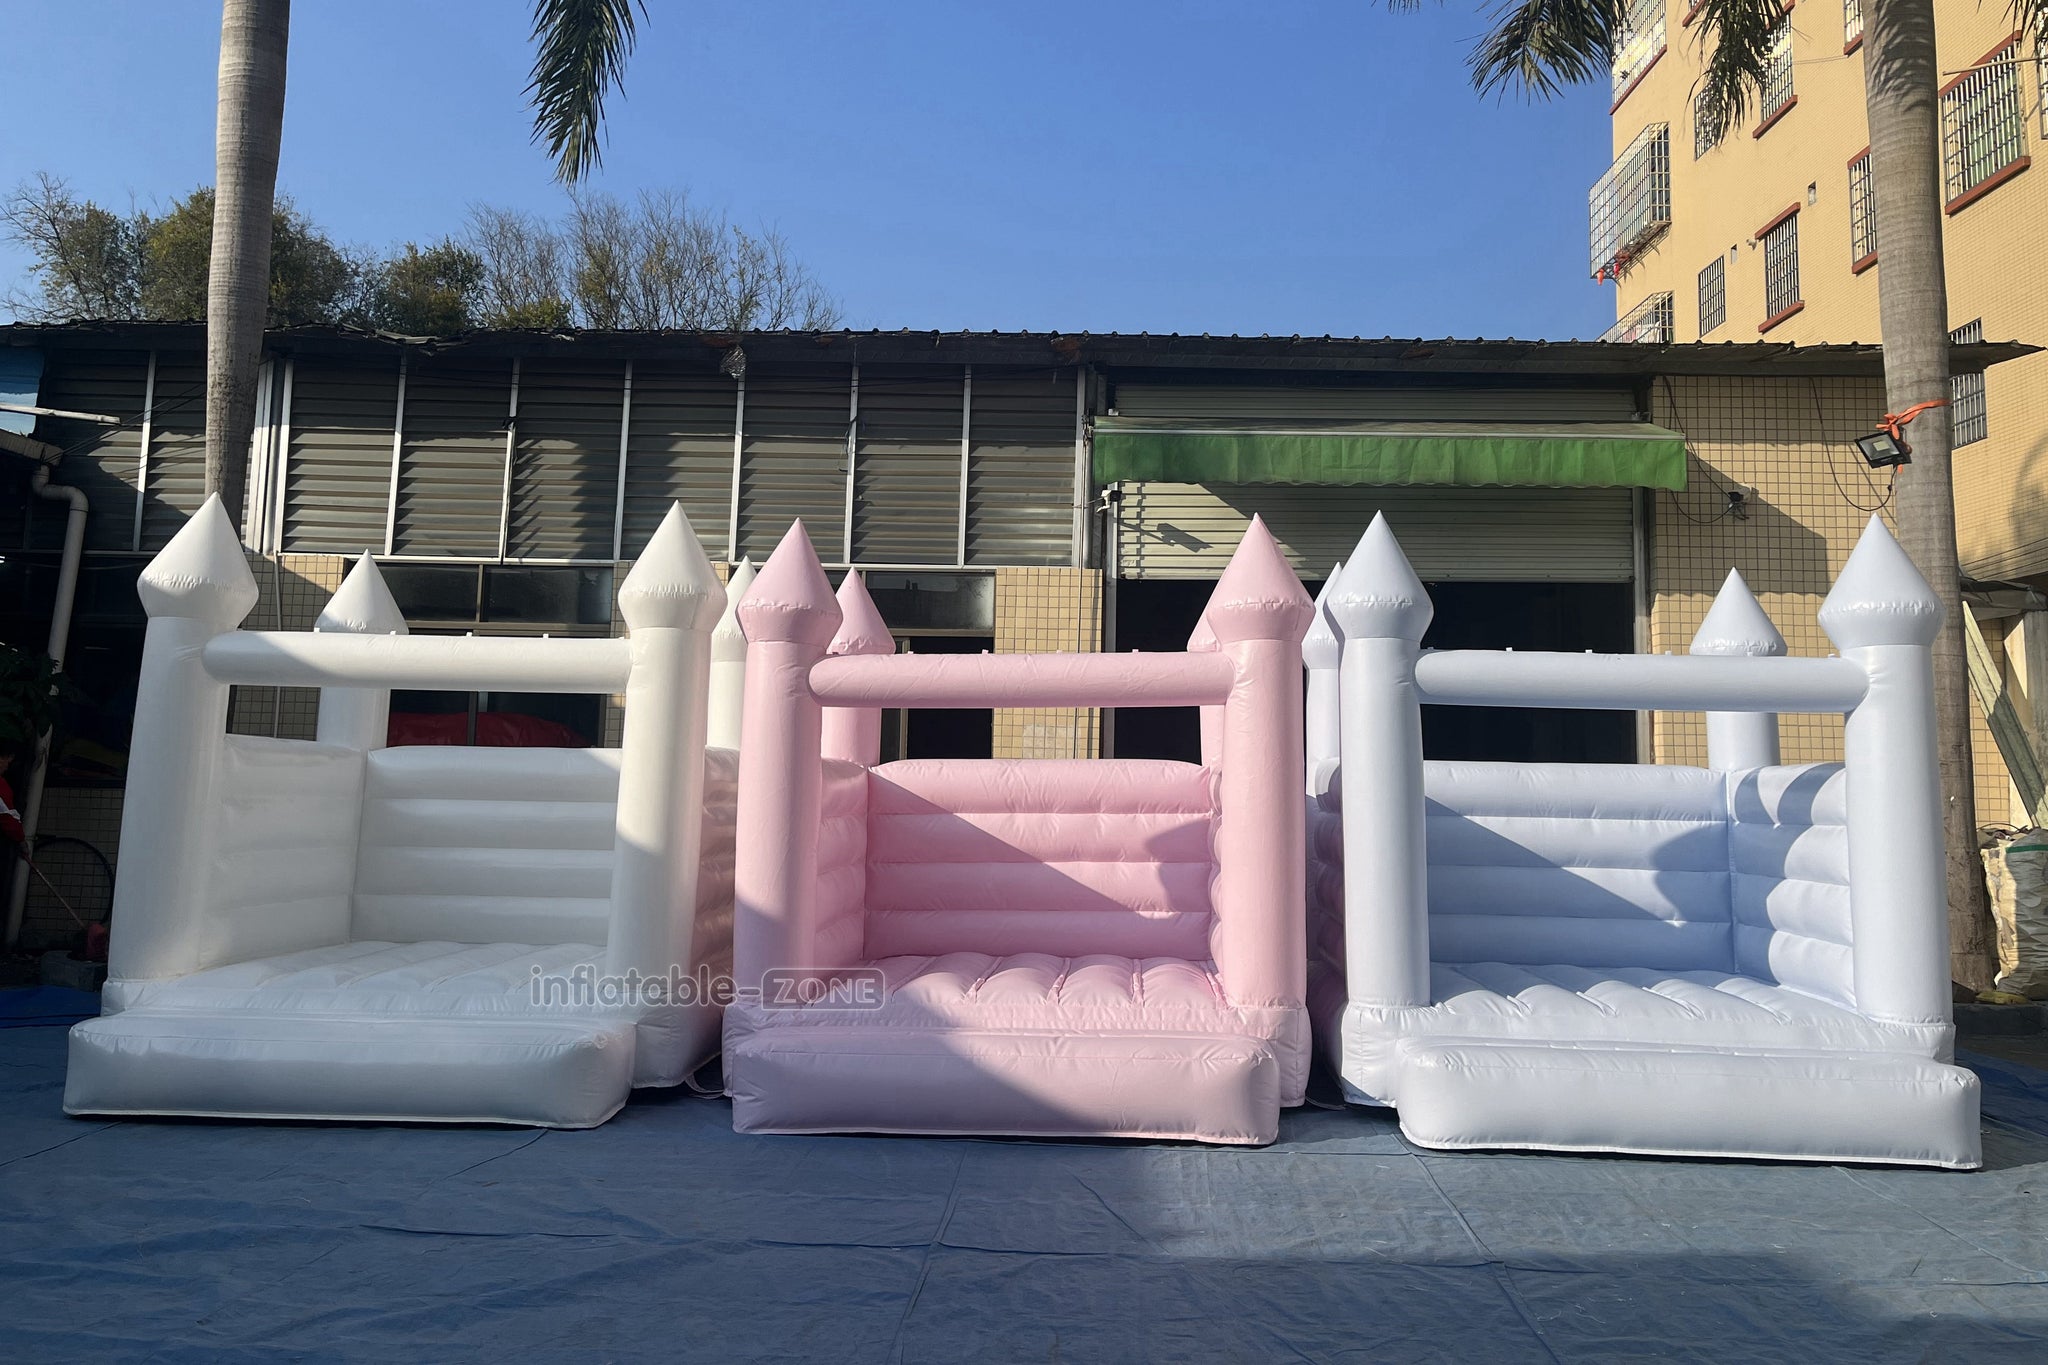 Mini Bounce House Commercial Inflatable Bouncer Jumping Bouncy Castle Soft Play For Kids